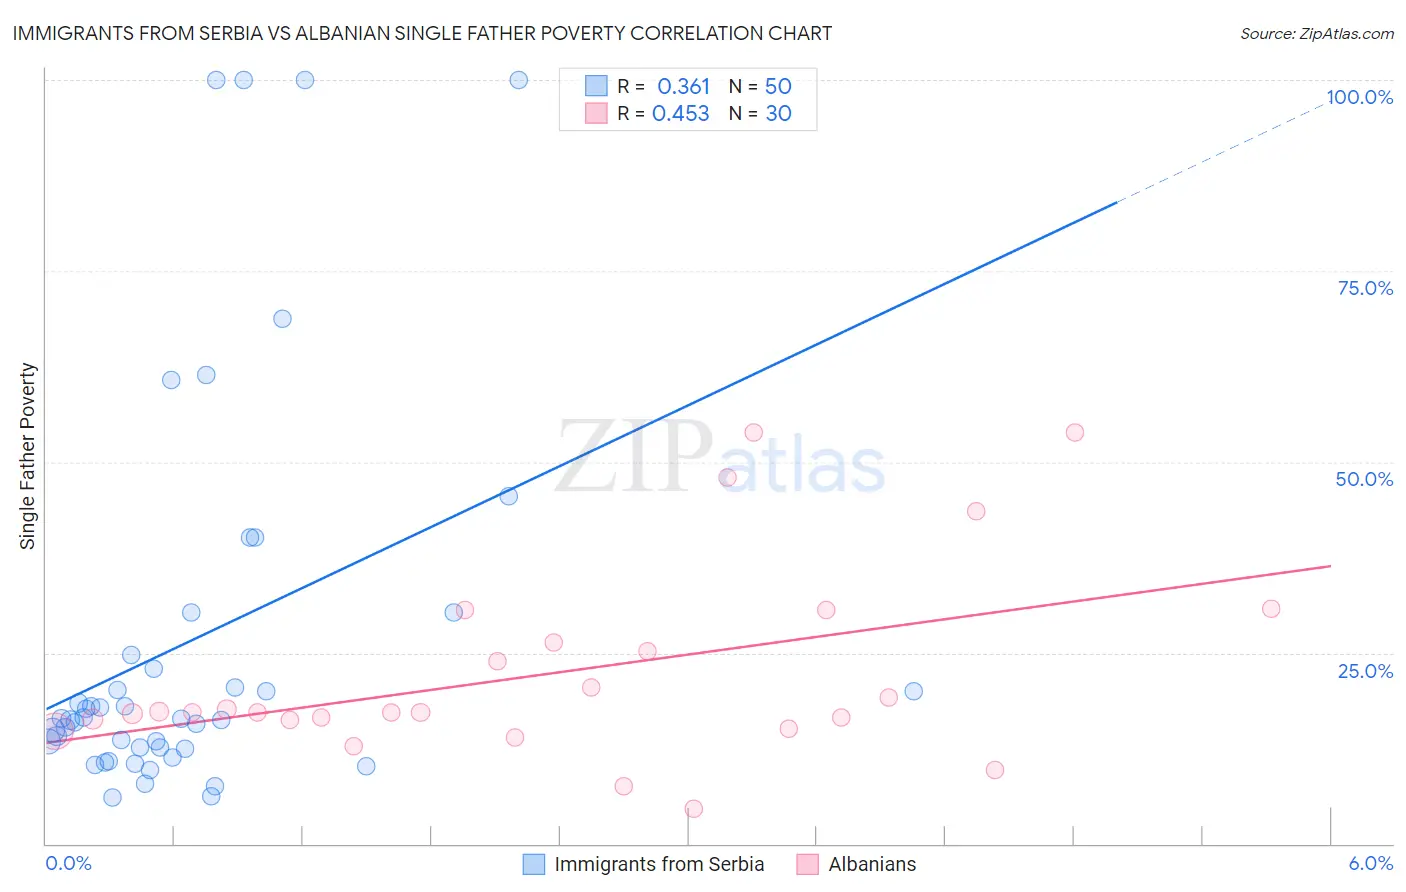 Immigrants from Serbia vs Albanian Single Father Poverty